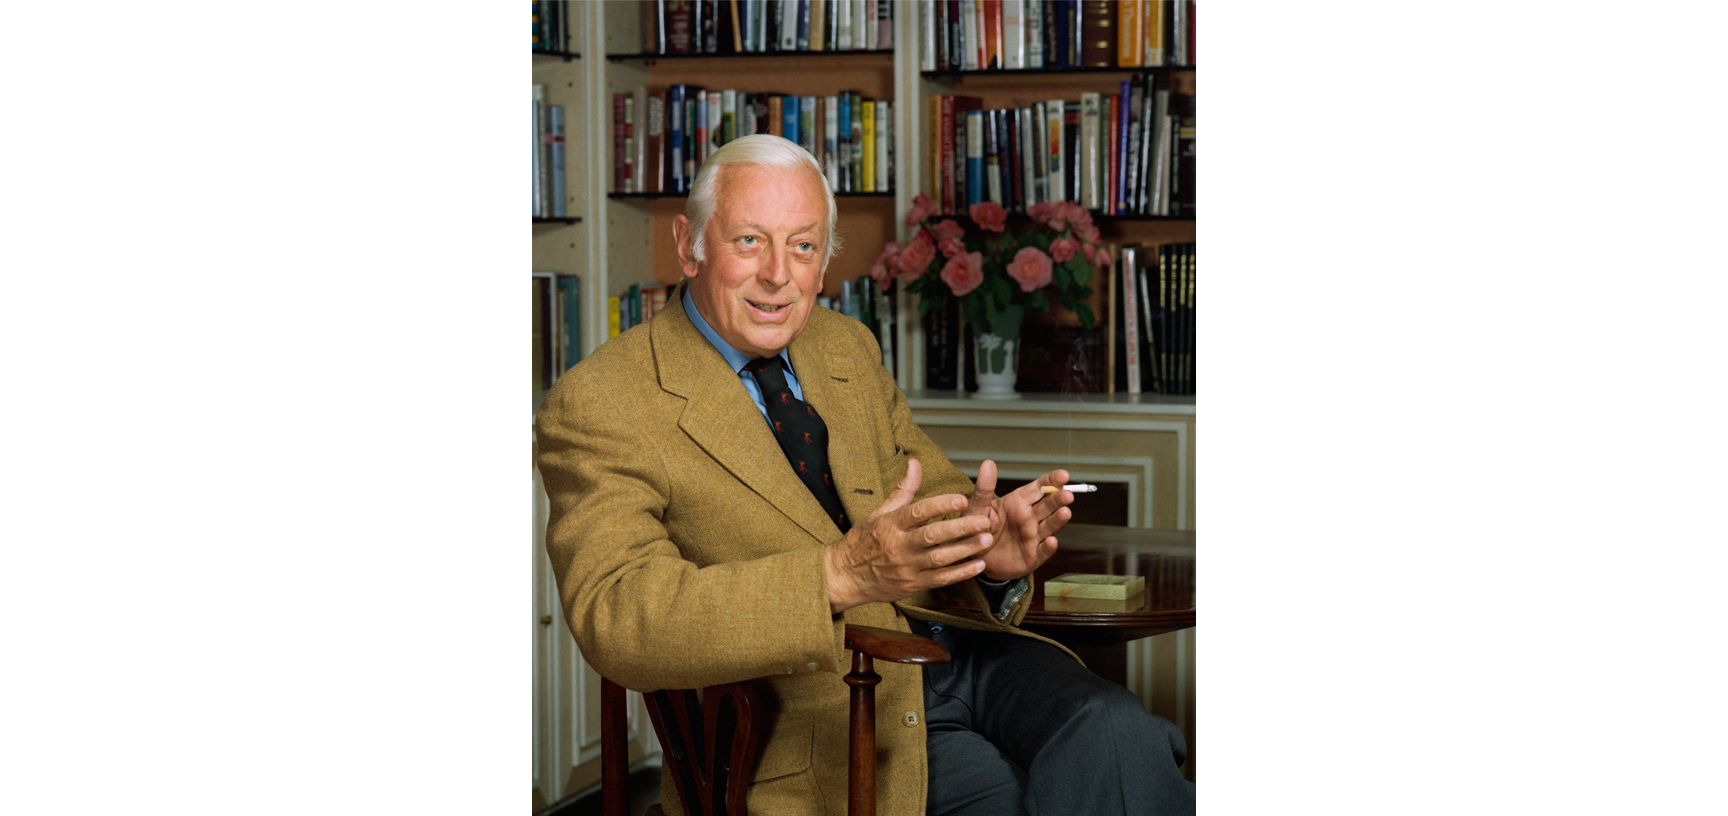 Portrait of Alistair Cooke - an older white male with white hair, dressed in a tan blazer, blue shirt and navy tie, sitting in a wooden chair looking diagnol to the camera with bookshelves in the background